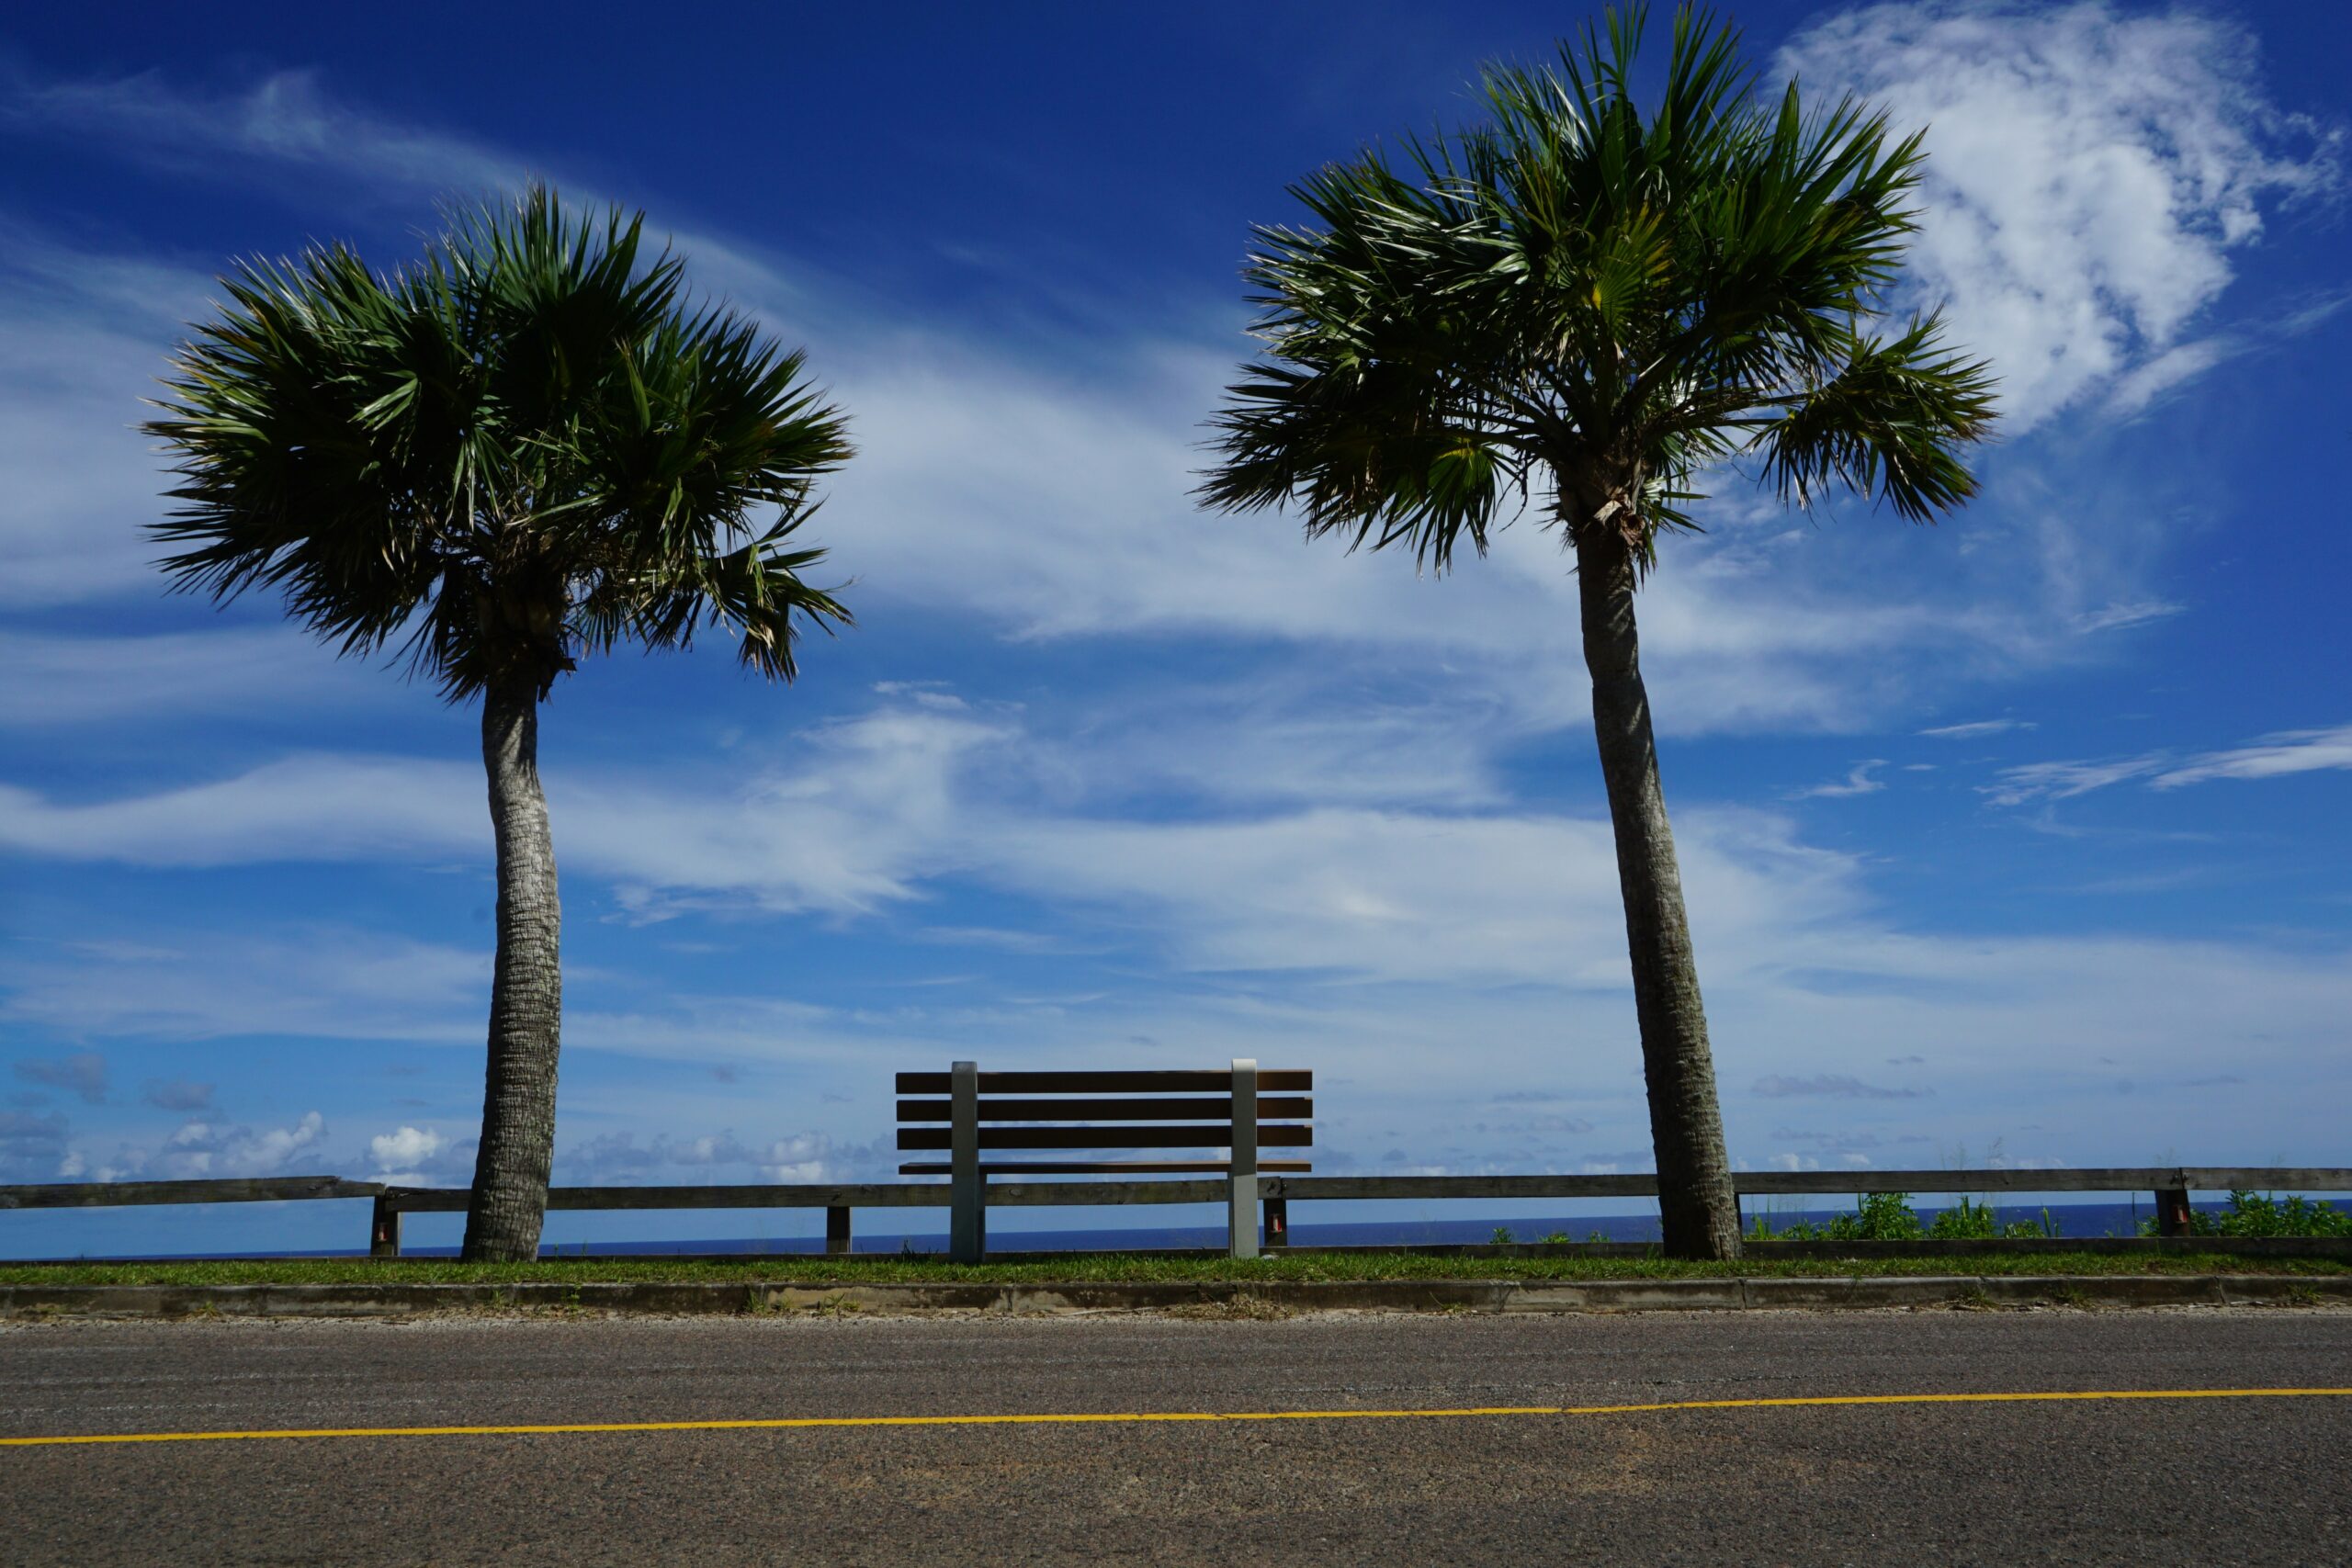 Transportation in Bermuda can be tricky for visitors who want to make affordable choices. Learn more about the best ways to get around the island.
pictured: Palm trees and a road near the ocean in Bermuda 